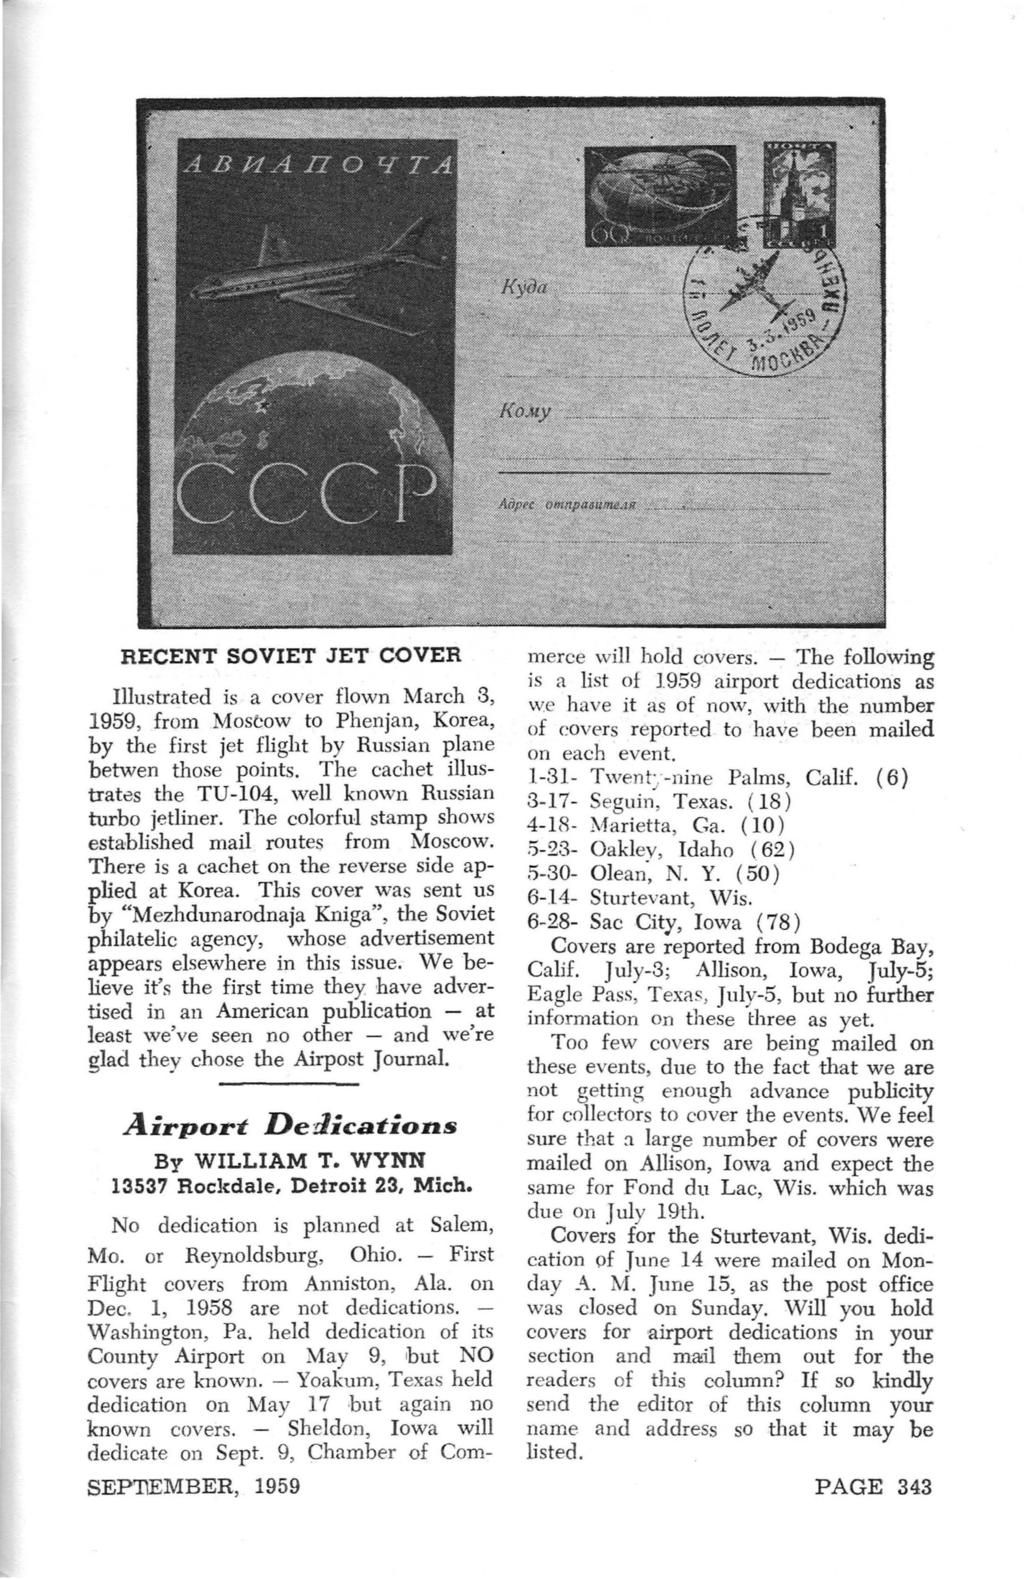 RECENT SOVIET JET COVER Illustrated is a cover flown March 3, 1959, from Moscow to Phenjan, Korea, by the first jet flight by Russian plane betwen those points.